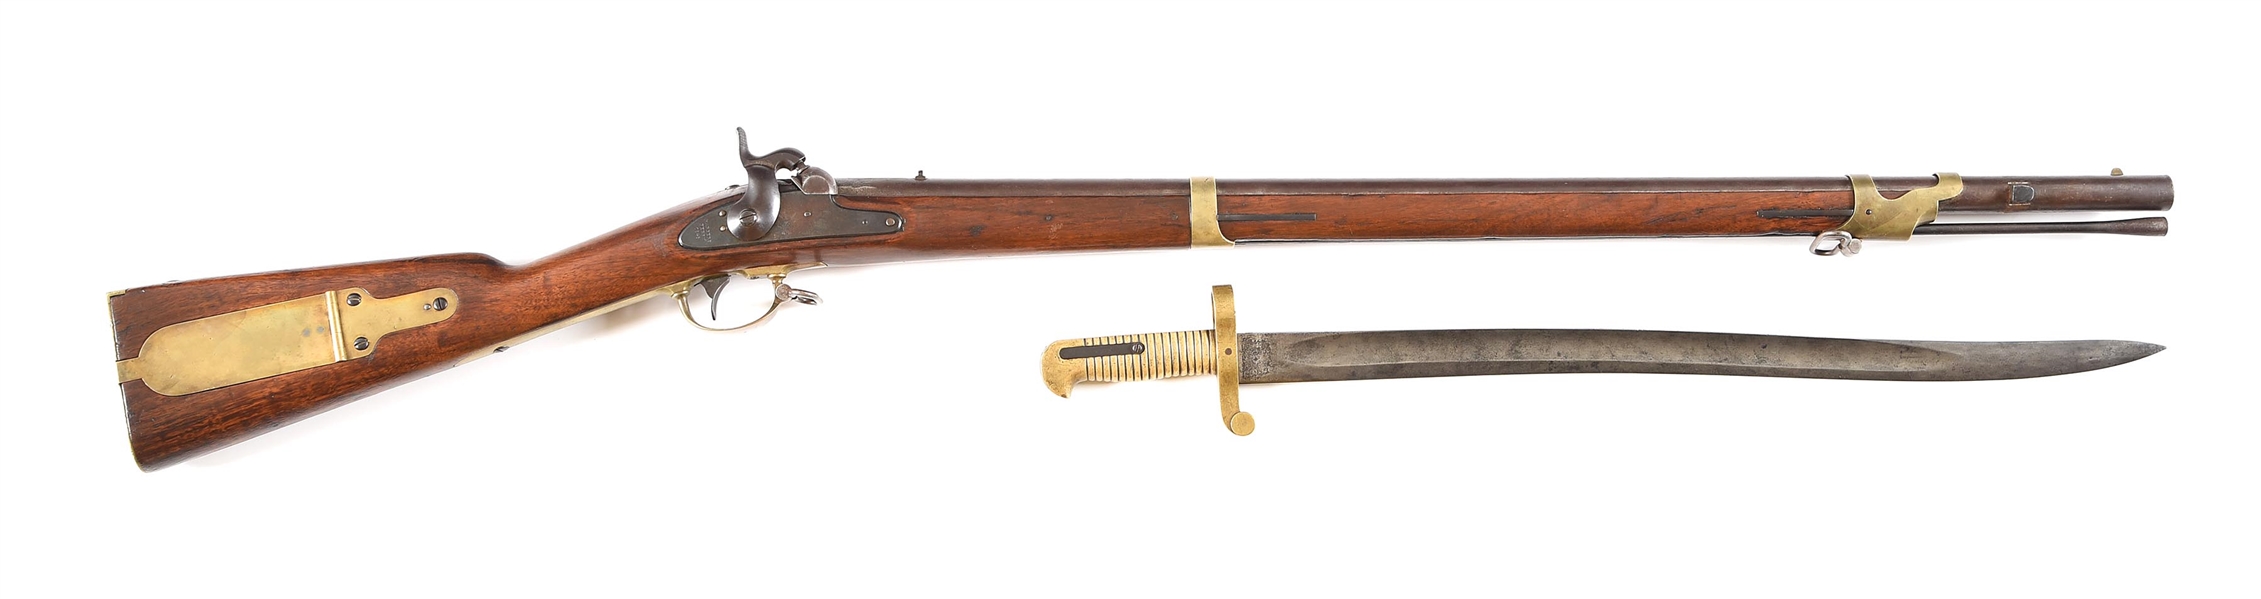 (A) CONFEDERATE HAPPOLDT ALTERATION HARPERS FERRY MODEL 1841 MISSISSIPPI RIFLE WITH BAYONET AND CANTEEN ATTRIBUTED TO HENRY HUFF, 5TH VIRGINIA INFANTRY, STONEWALL BRIGADE.